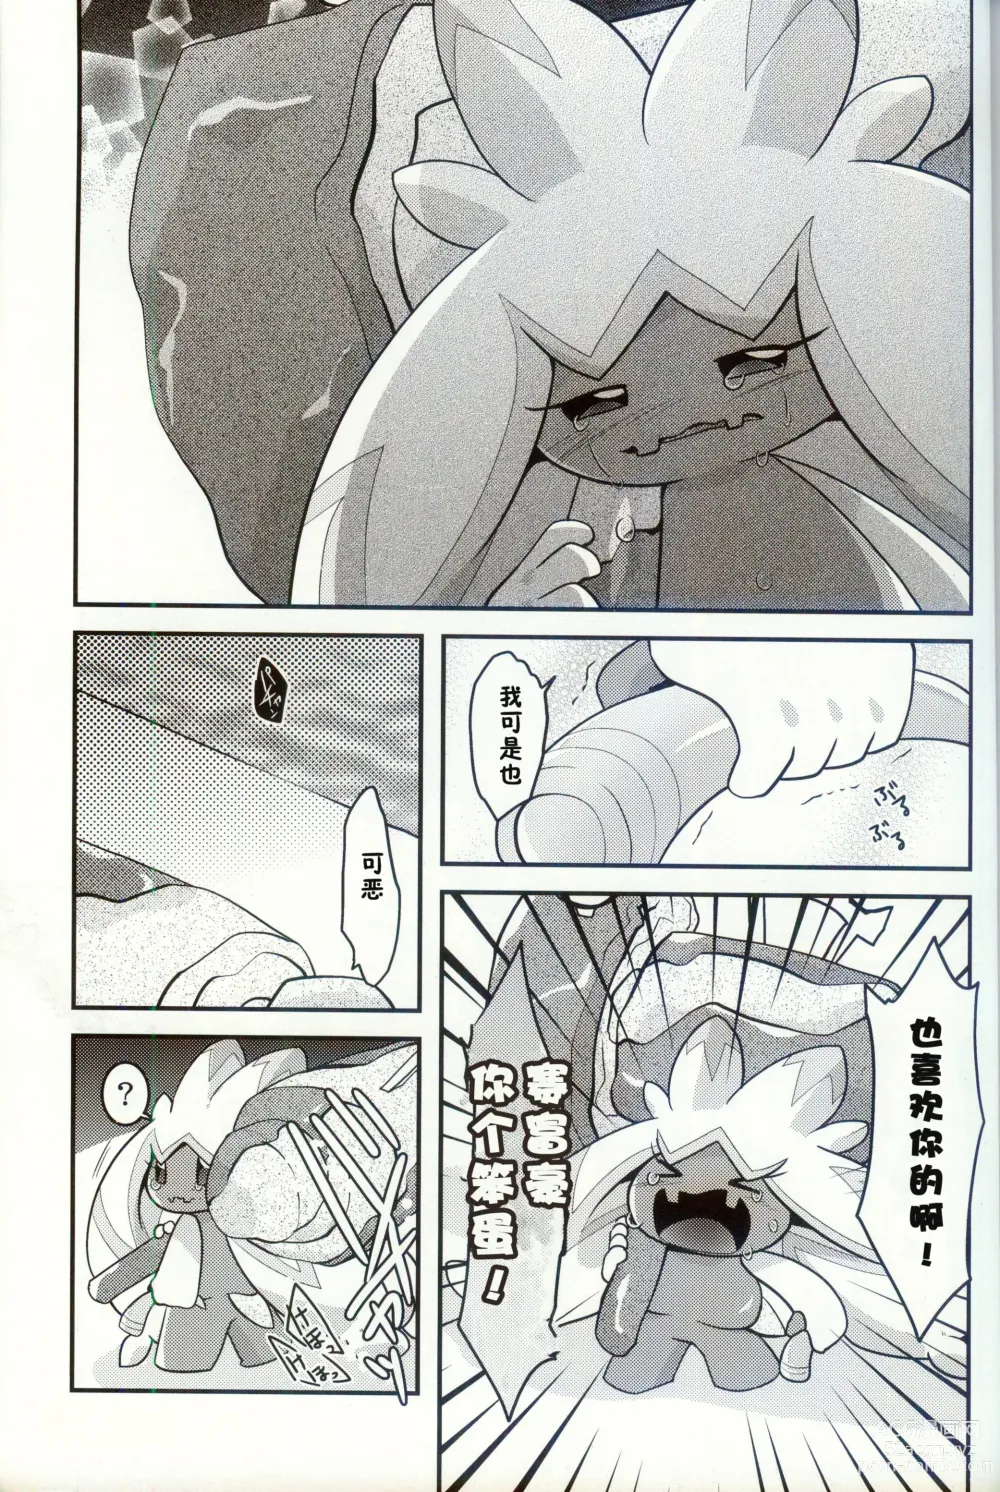 Page 76 of doujinshi 横滨的塞富豪巨锻匠